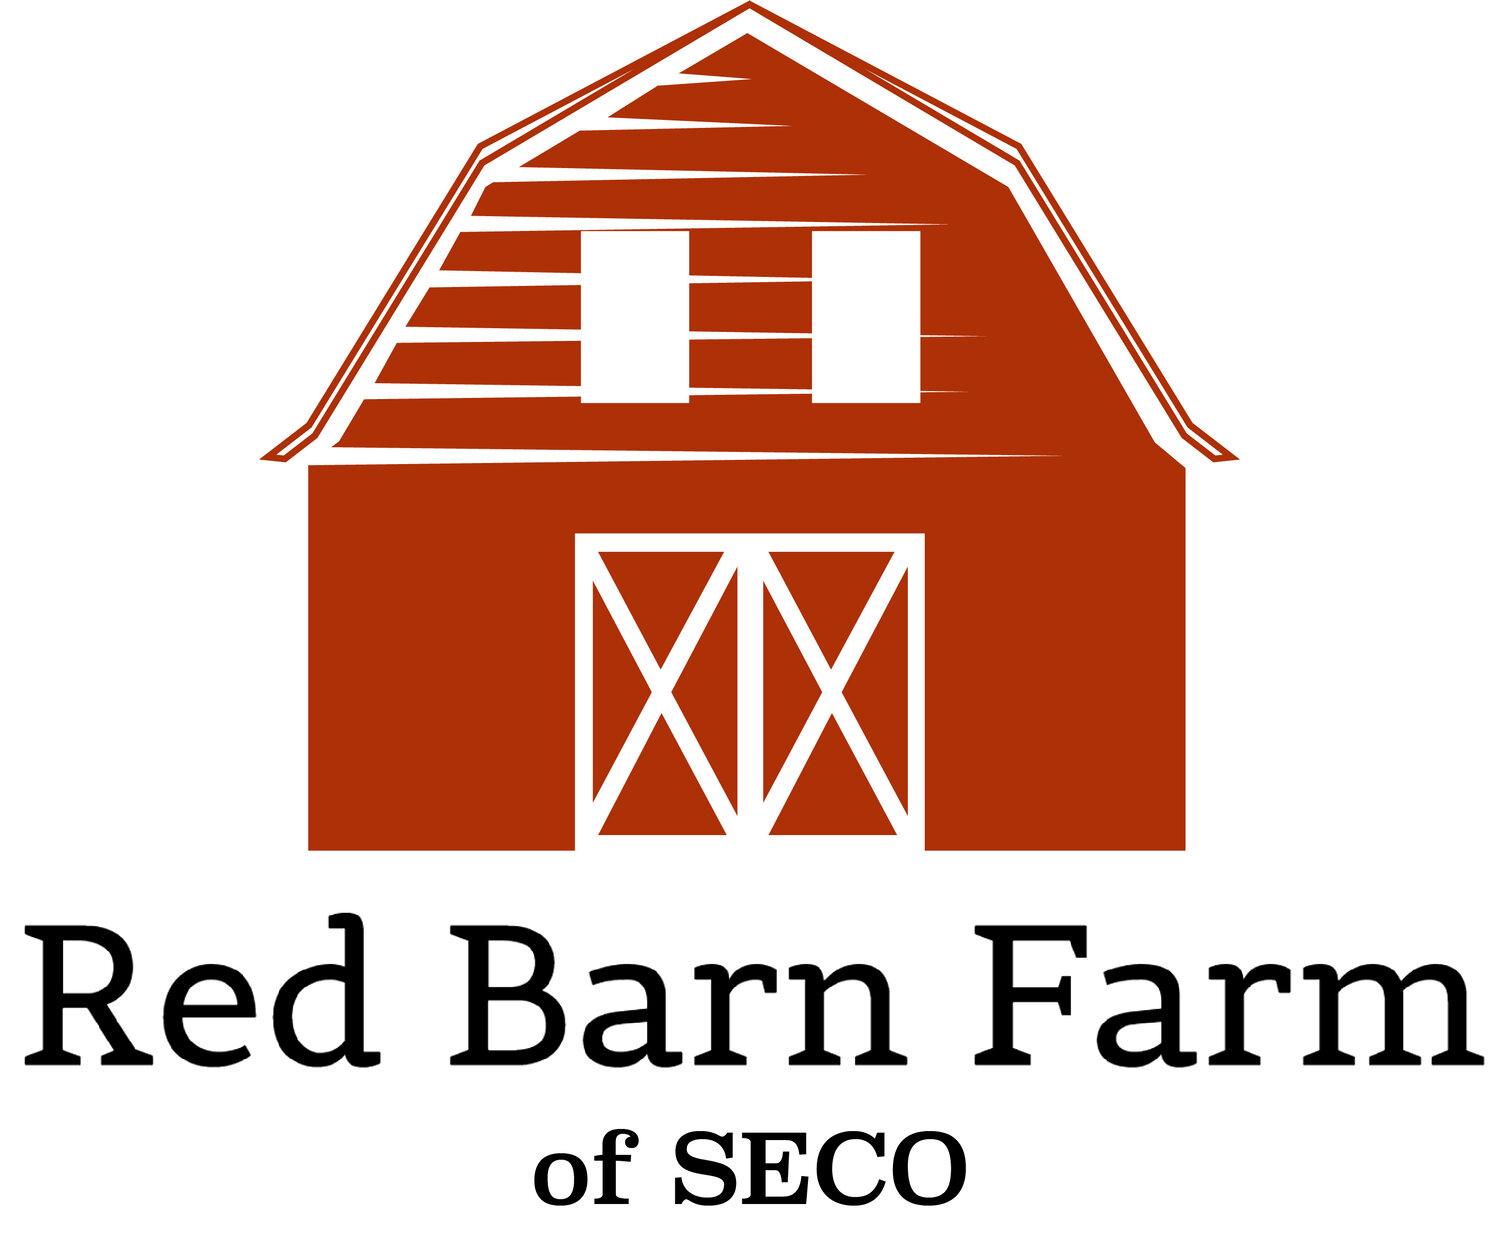 Red Barn Farm of SECO